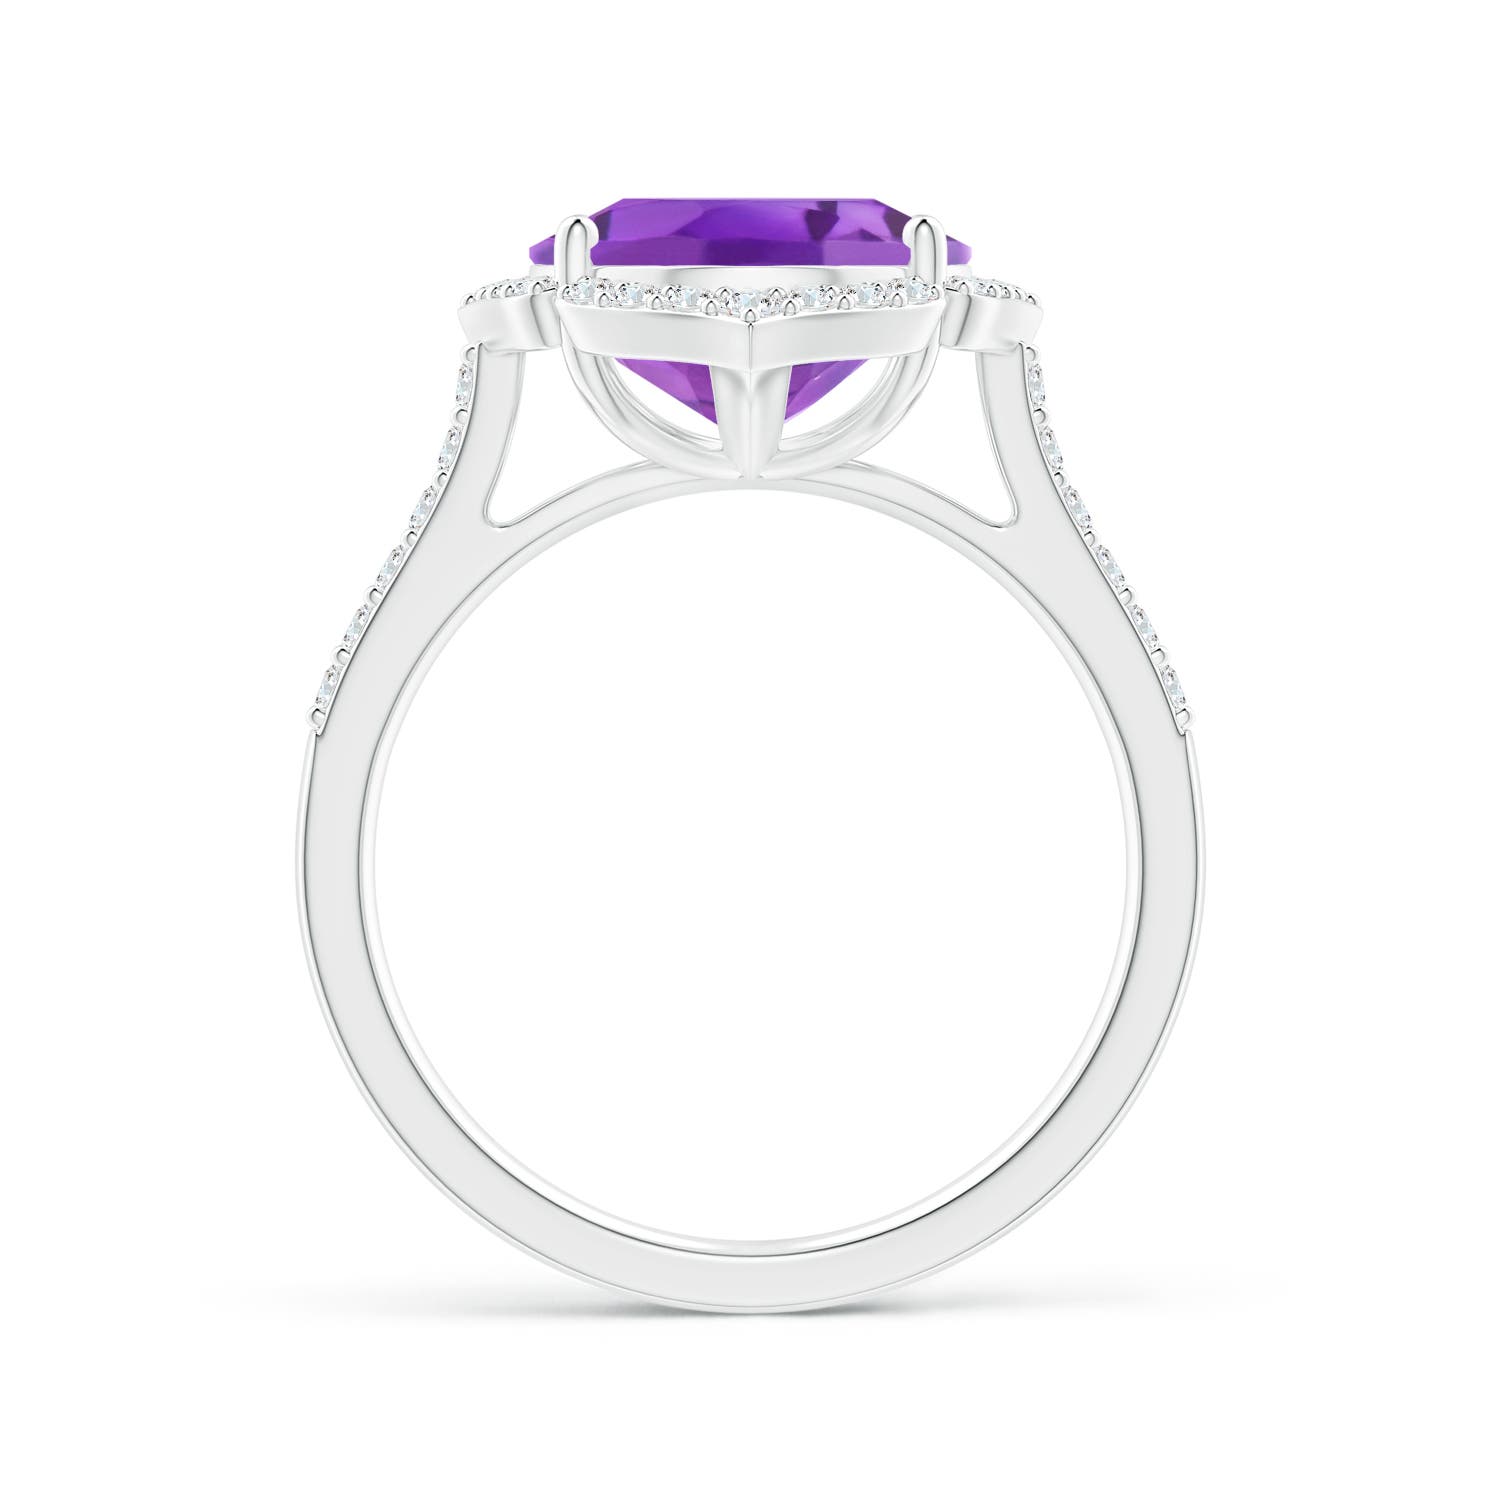 AA - Amethyst / 4.59 CT / 14 KT White Gold